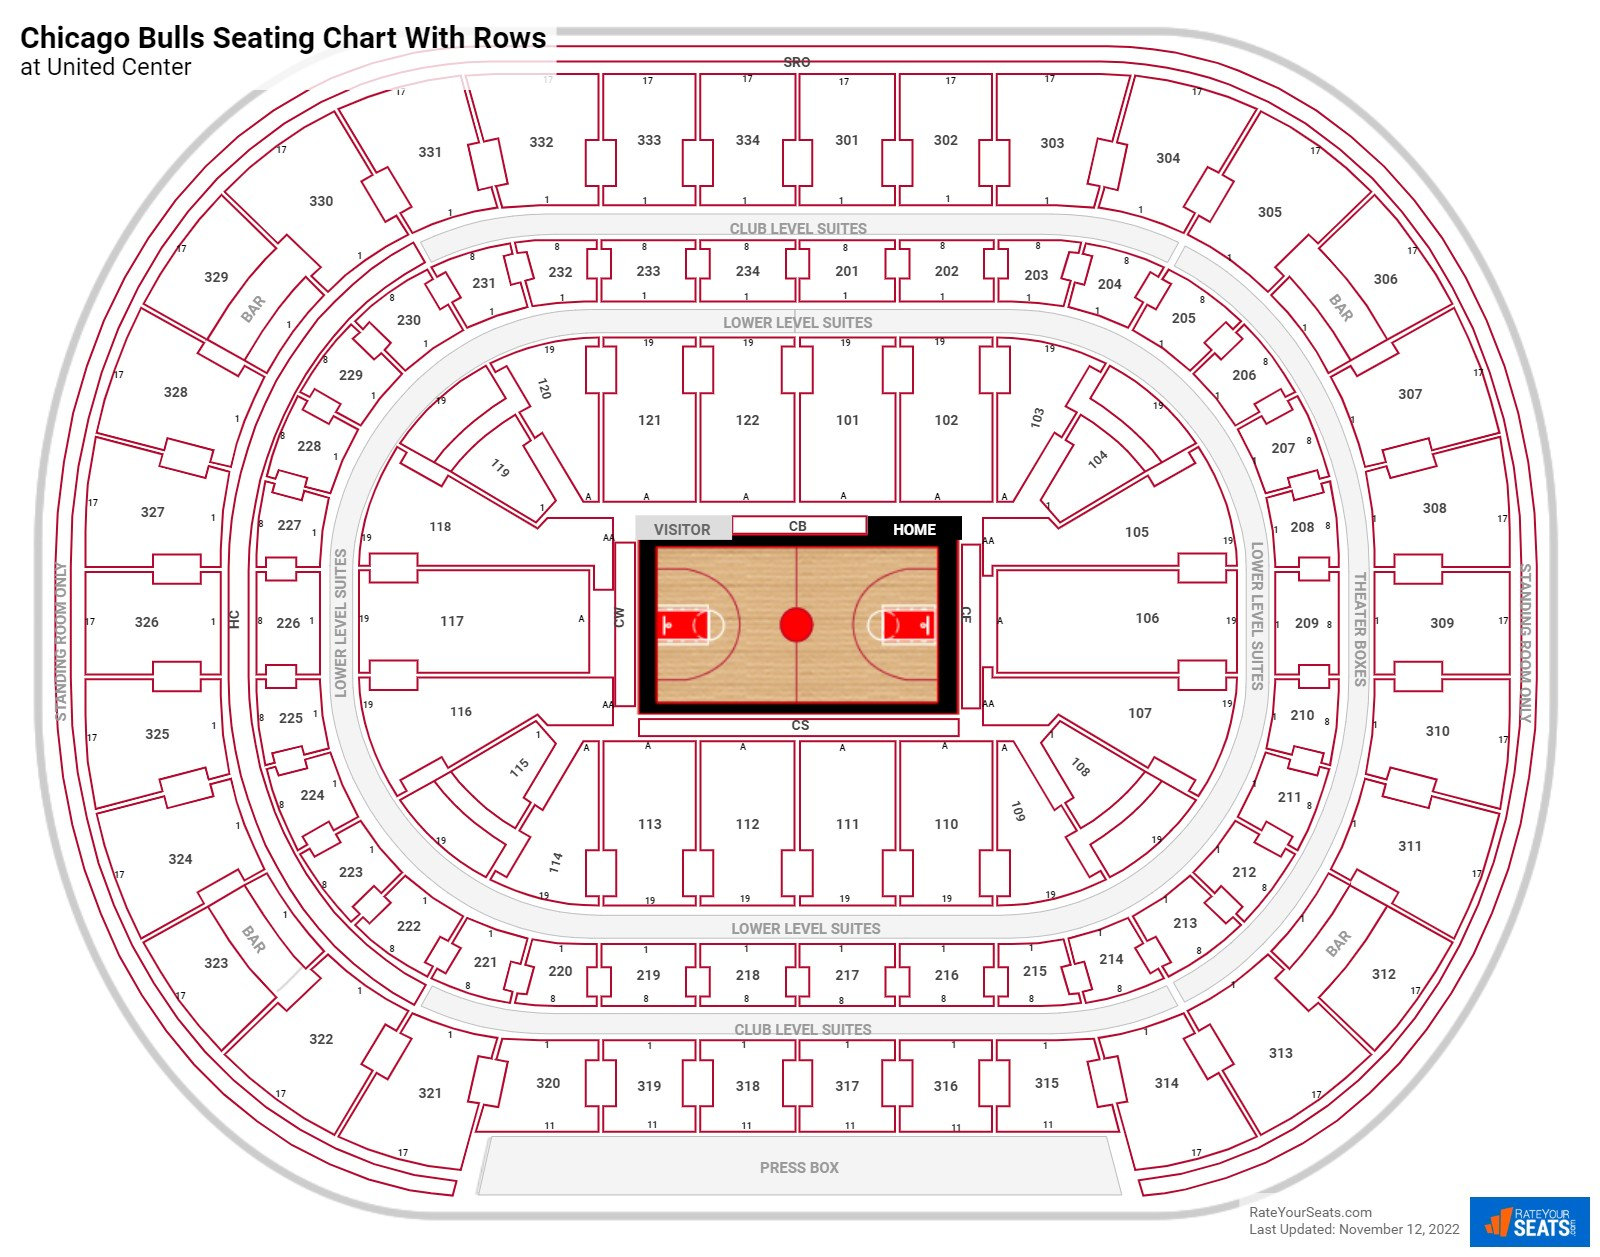 United Center seating chart with row numbers